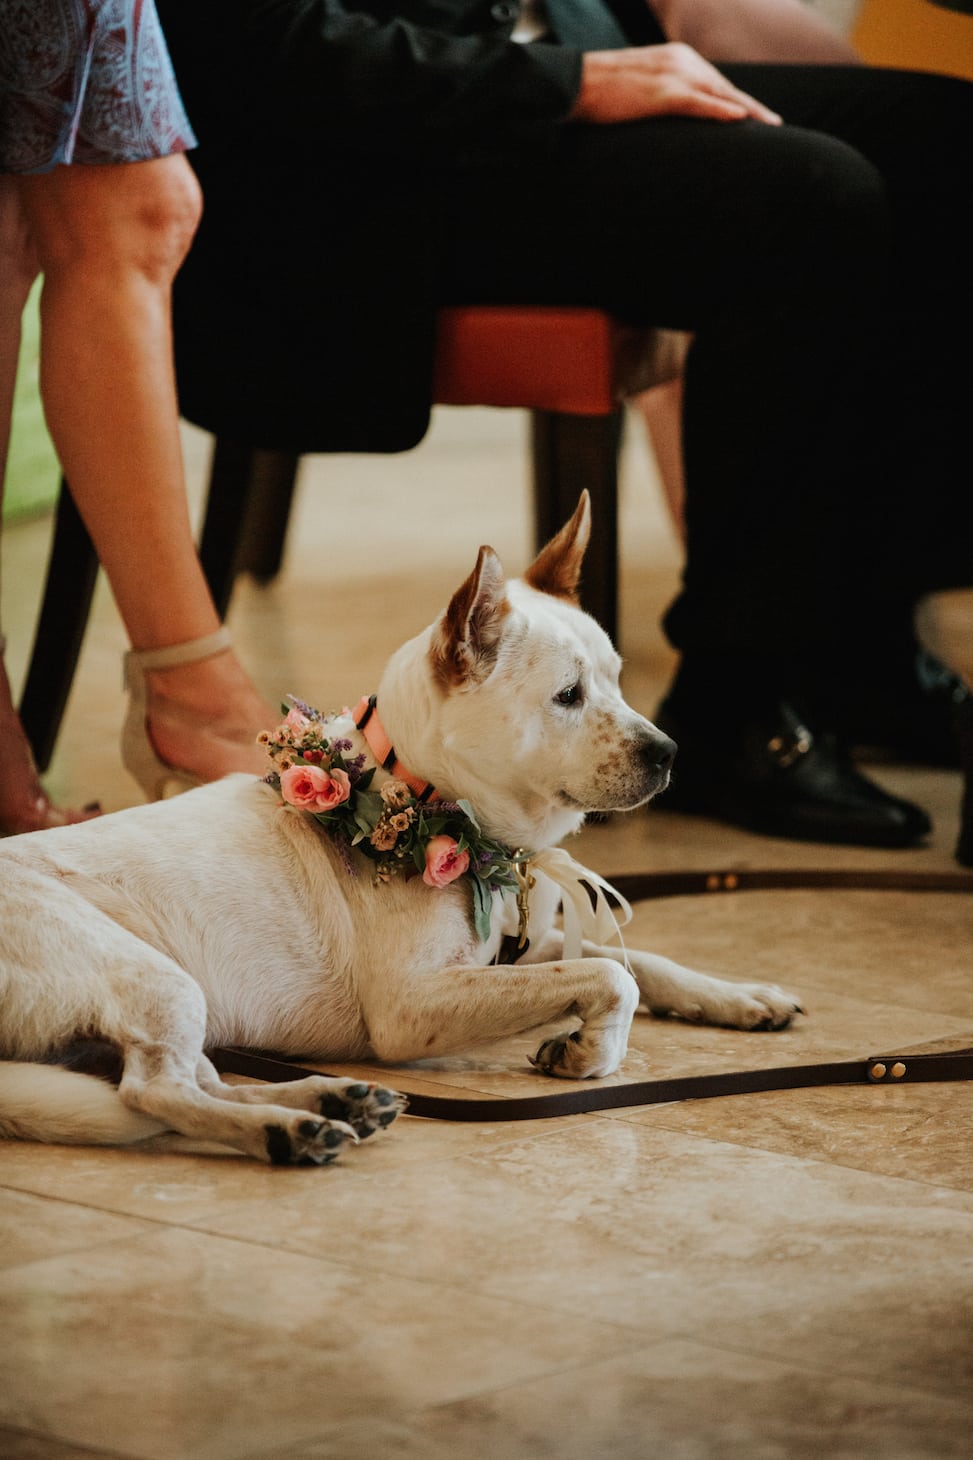 The dogs of the venue owners also took part in the wedding